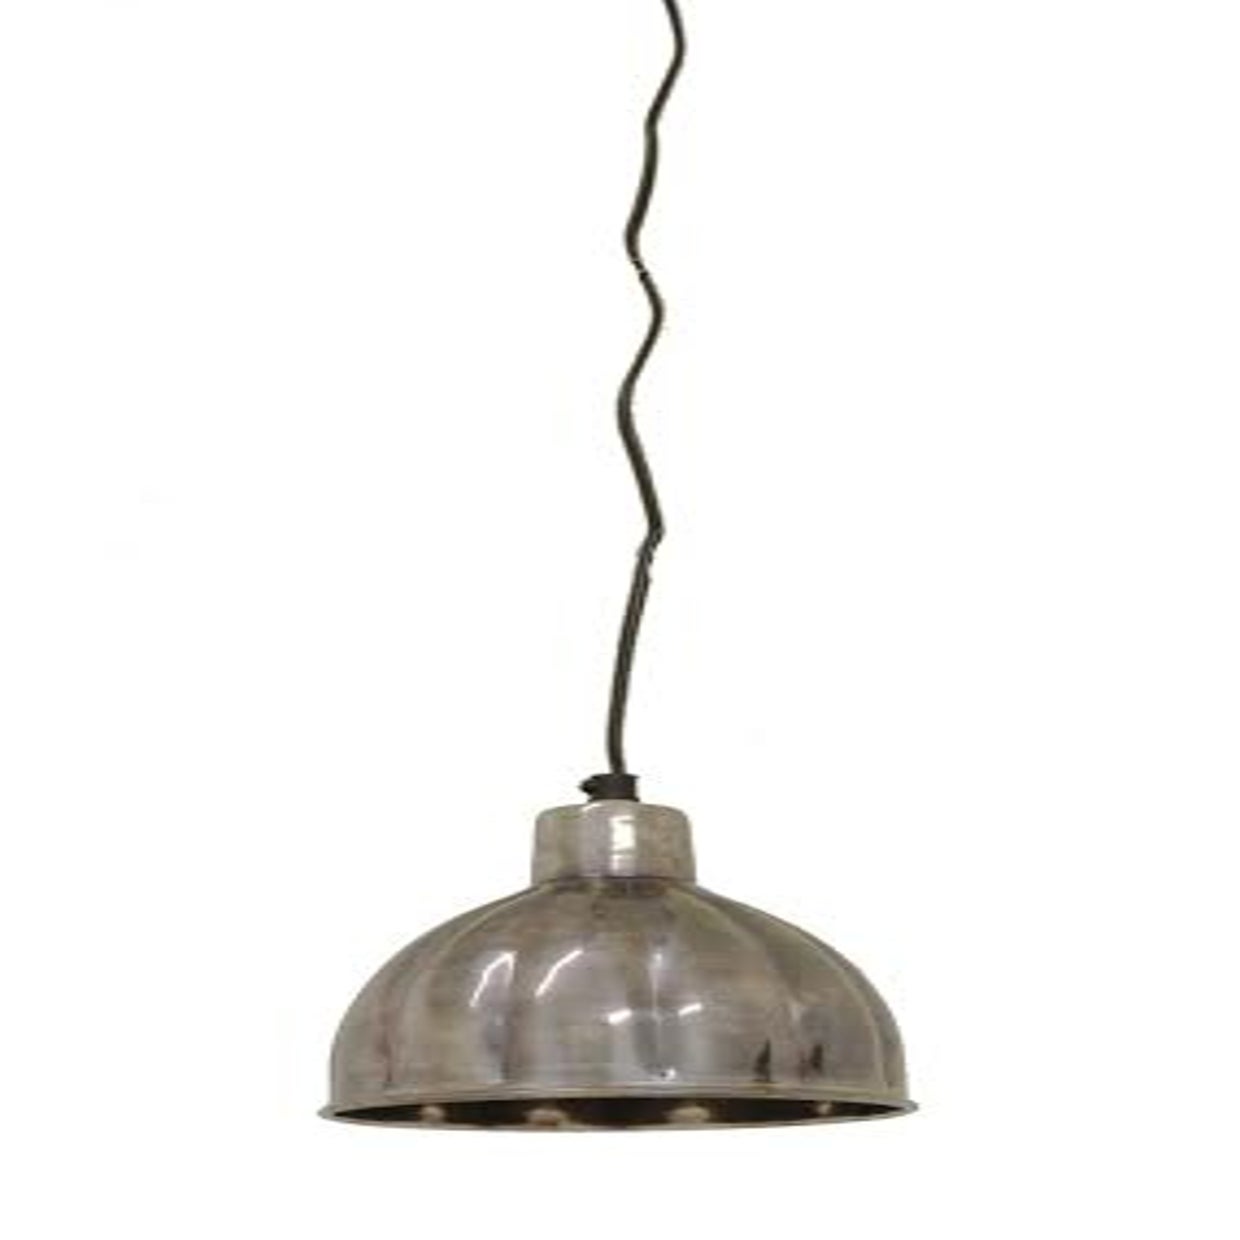 RIBBED HANGING LAMP IN PEWTER STYLE FINISH